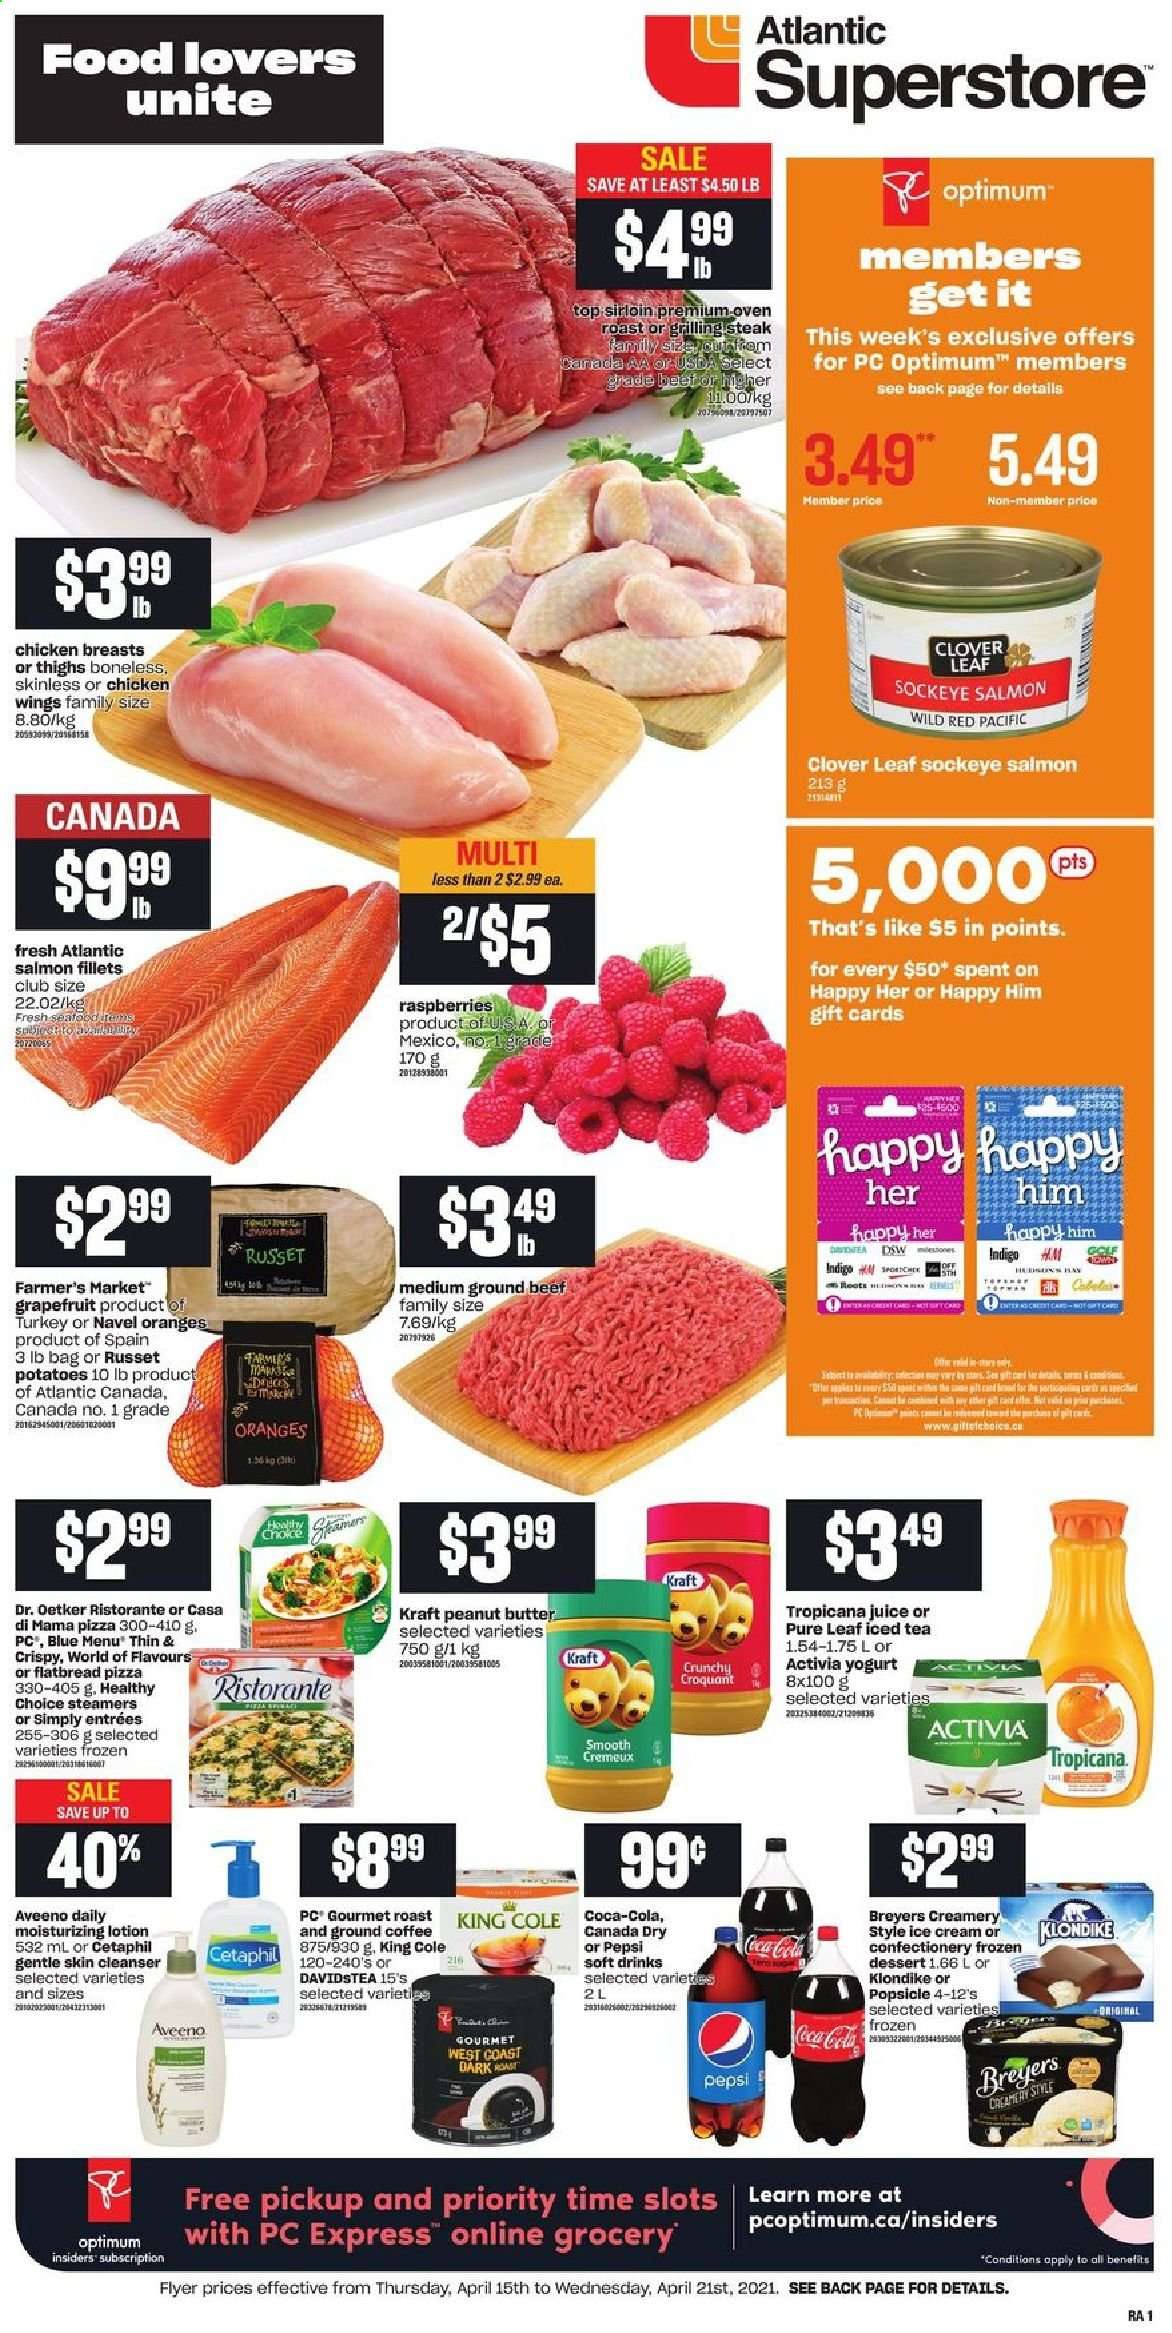 thumbnail - Atlantic Superstore Flyer - April 15, 2021 - April 21, 2021 - Sales products - flatbread, russet potatoes, potatoes, grapefruits, navel oranges, salmon, salmon fillet, pizza, Healthy Choice, Kraft®, Dr. Oetker, yoghurt, Clover, Activia, ice cream, chicken wings, peanut butter, Canada Dry, Coca-Cola, Pepsi, juice, ice tea, soft drink, Pure Leaf, coffee, ground coffee, chicken breasts, beef meat, ground beef, Aveeno, cleanser, body lotion, Optimum, steak. Page 1.